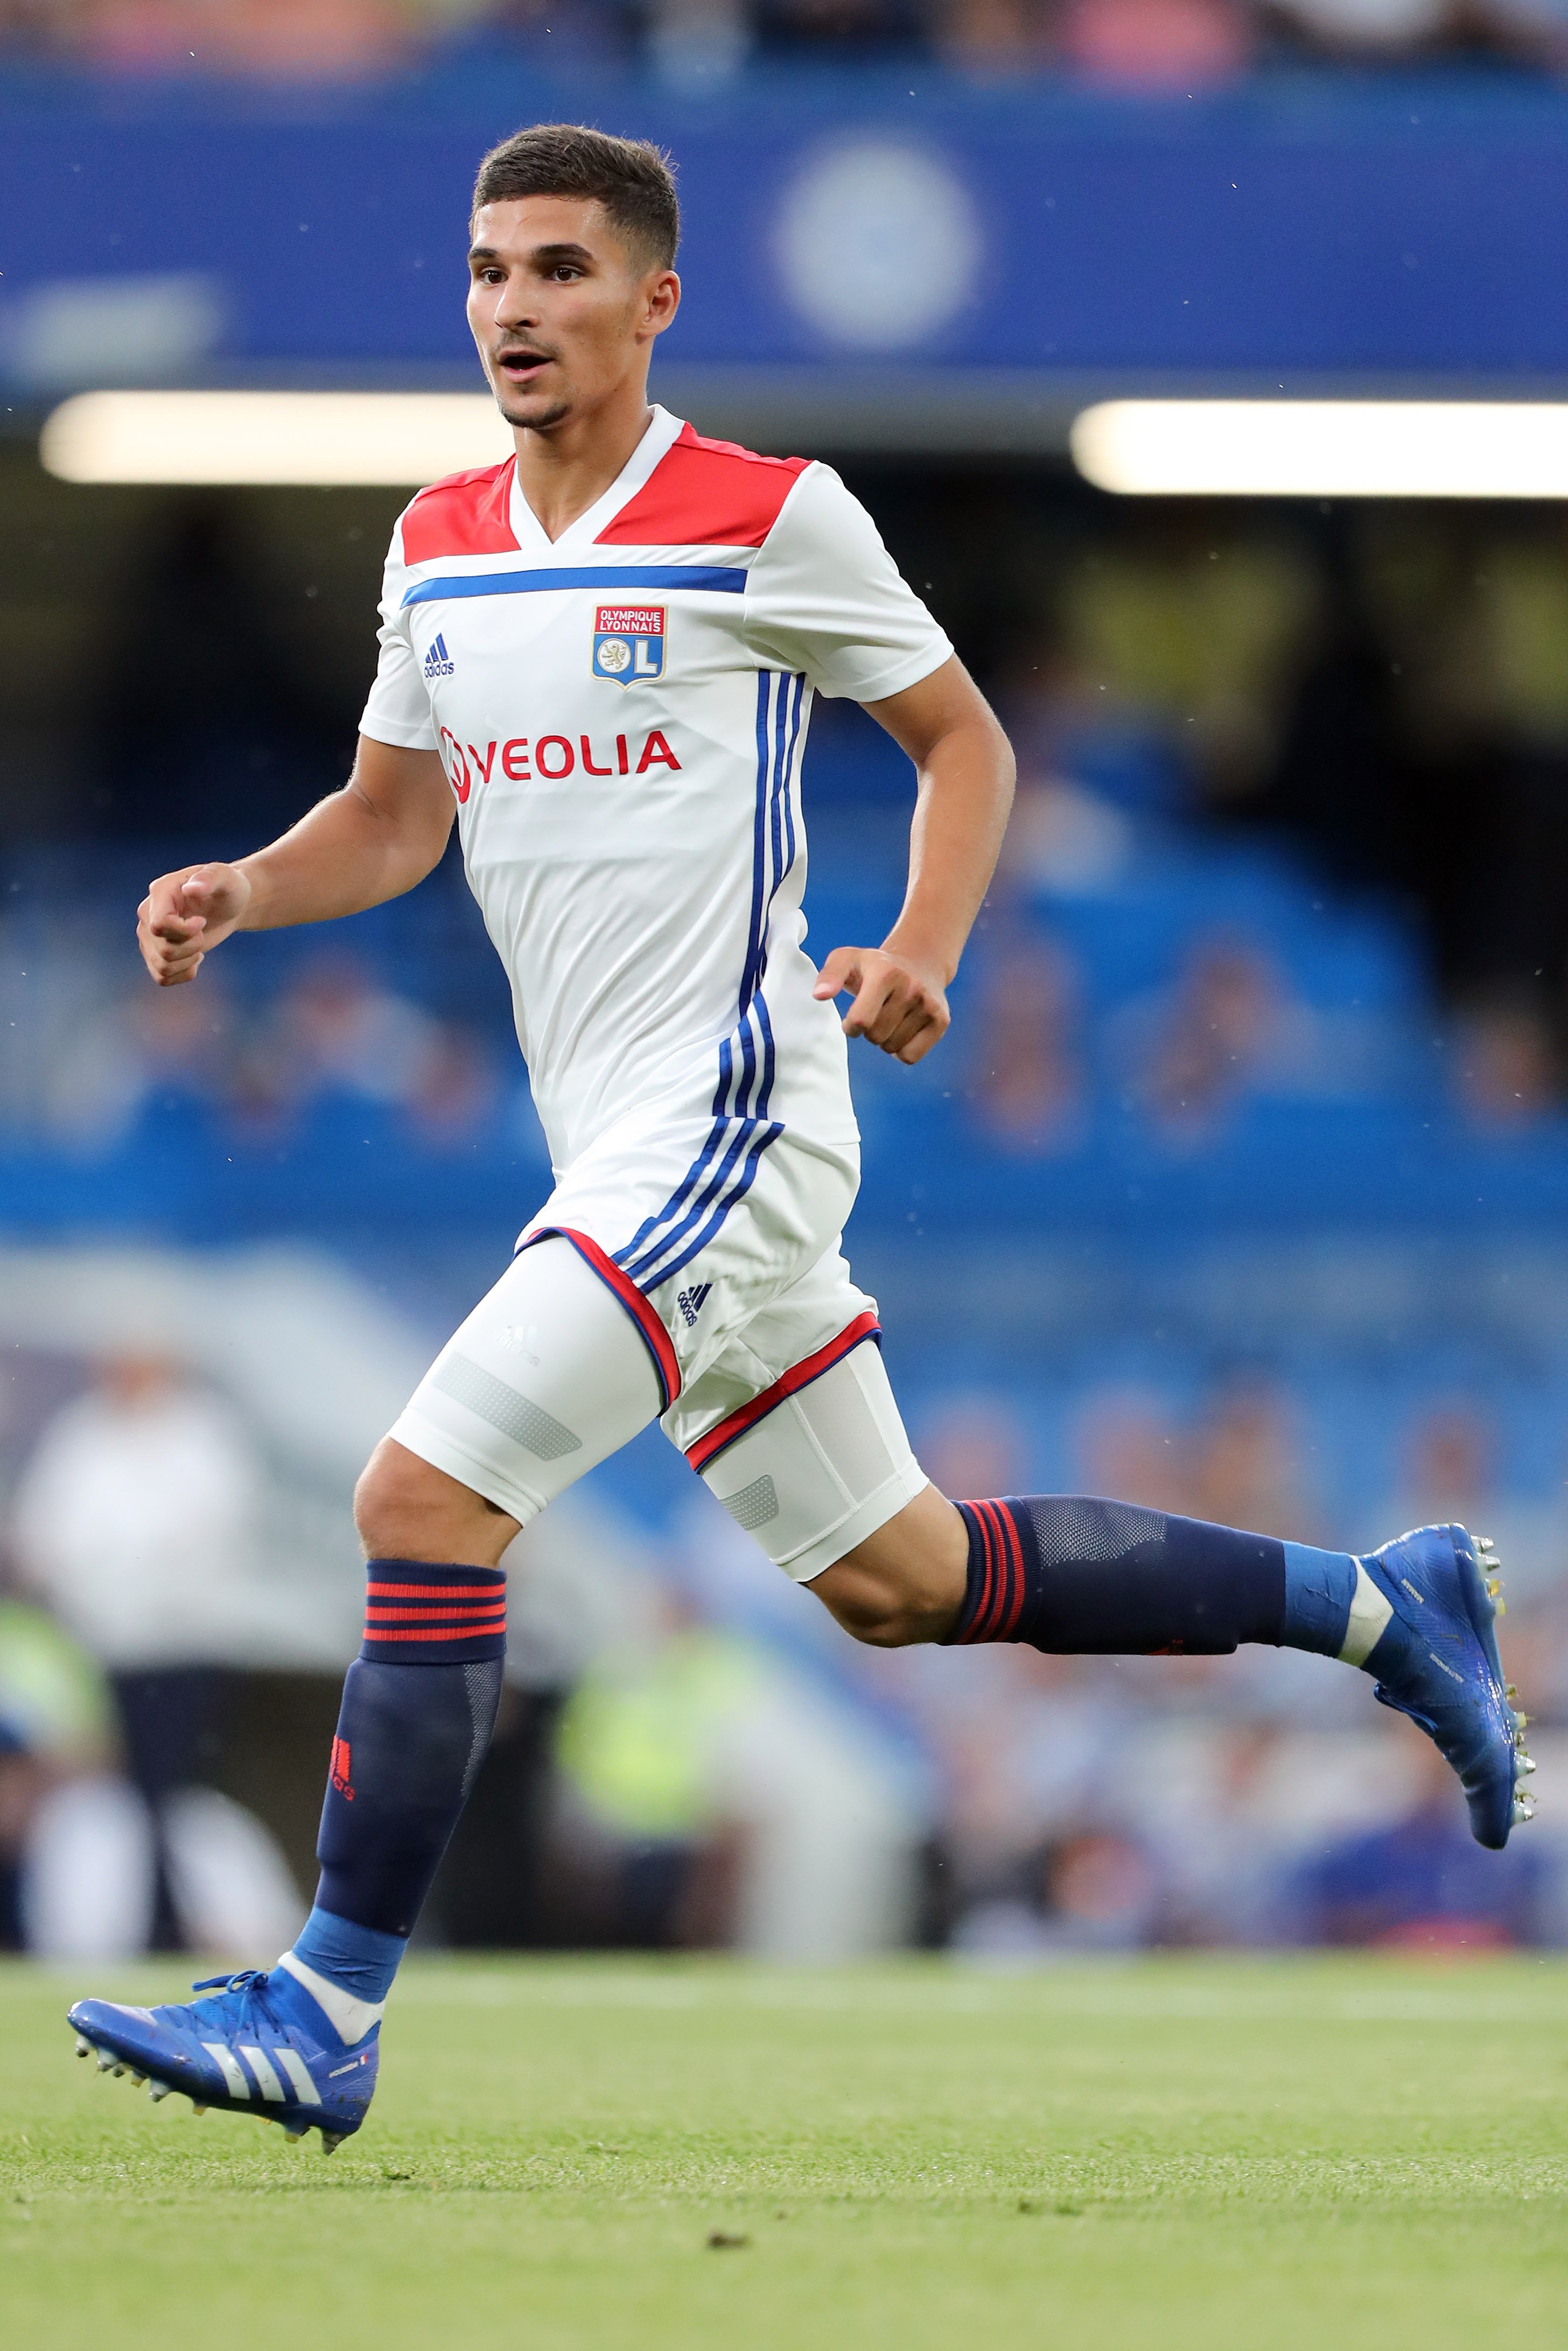 Arsenal close in on Houssem Aouar with Gunners agreeing terms with Lyon midfielder 'two weeks ago'